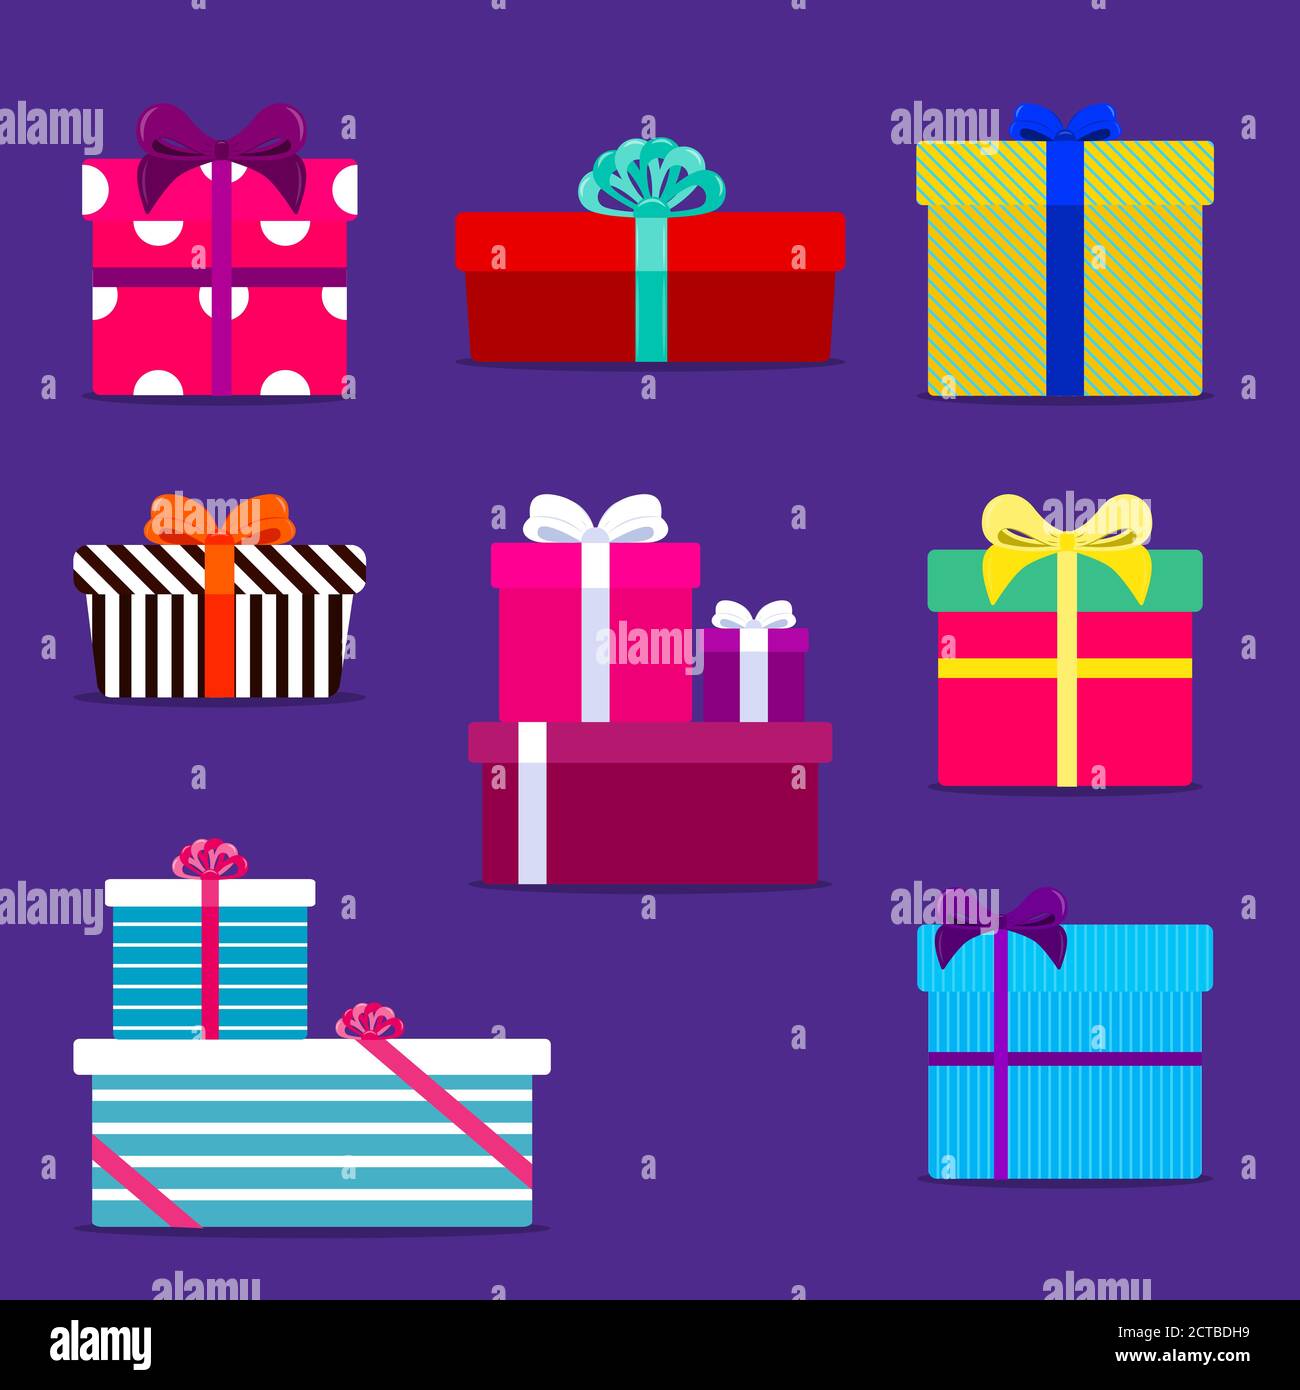 Set of Gift boxes icons in perspective in solid color wrapping